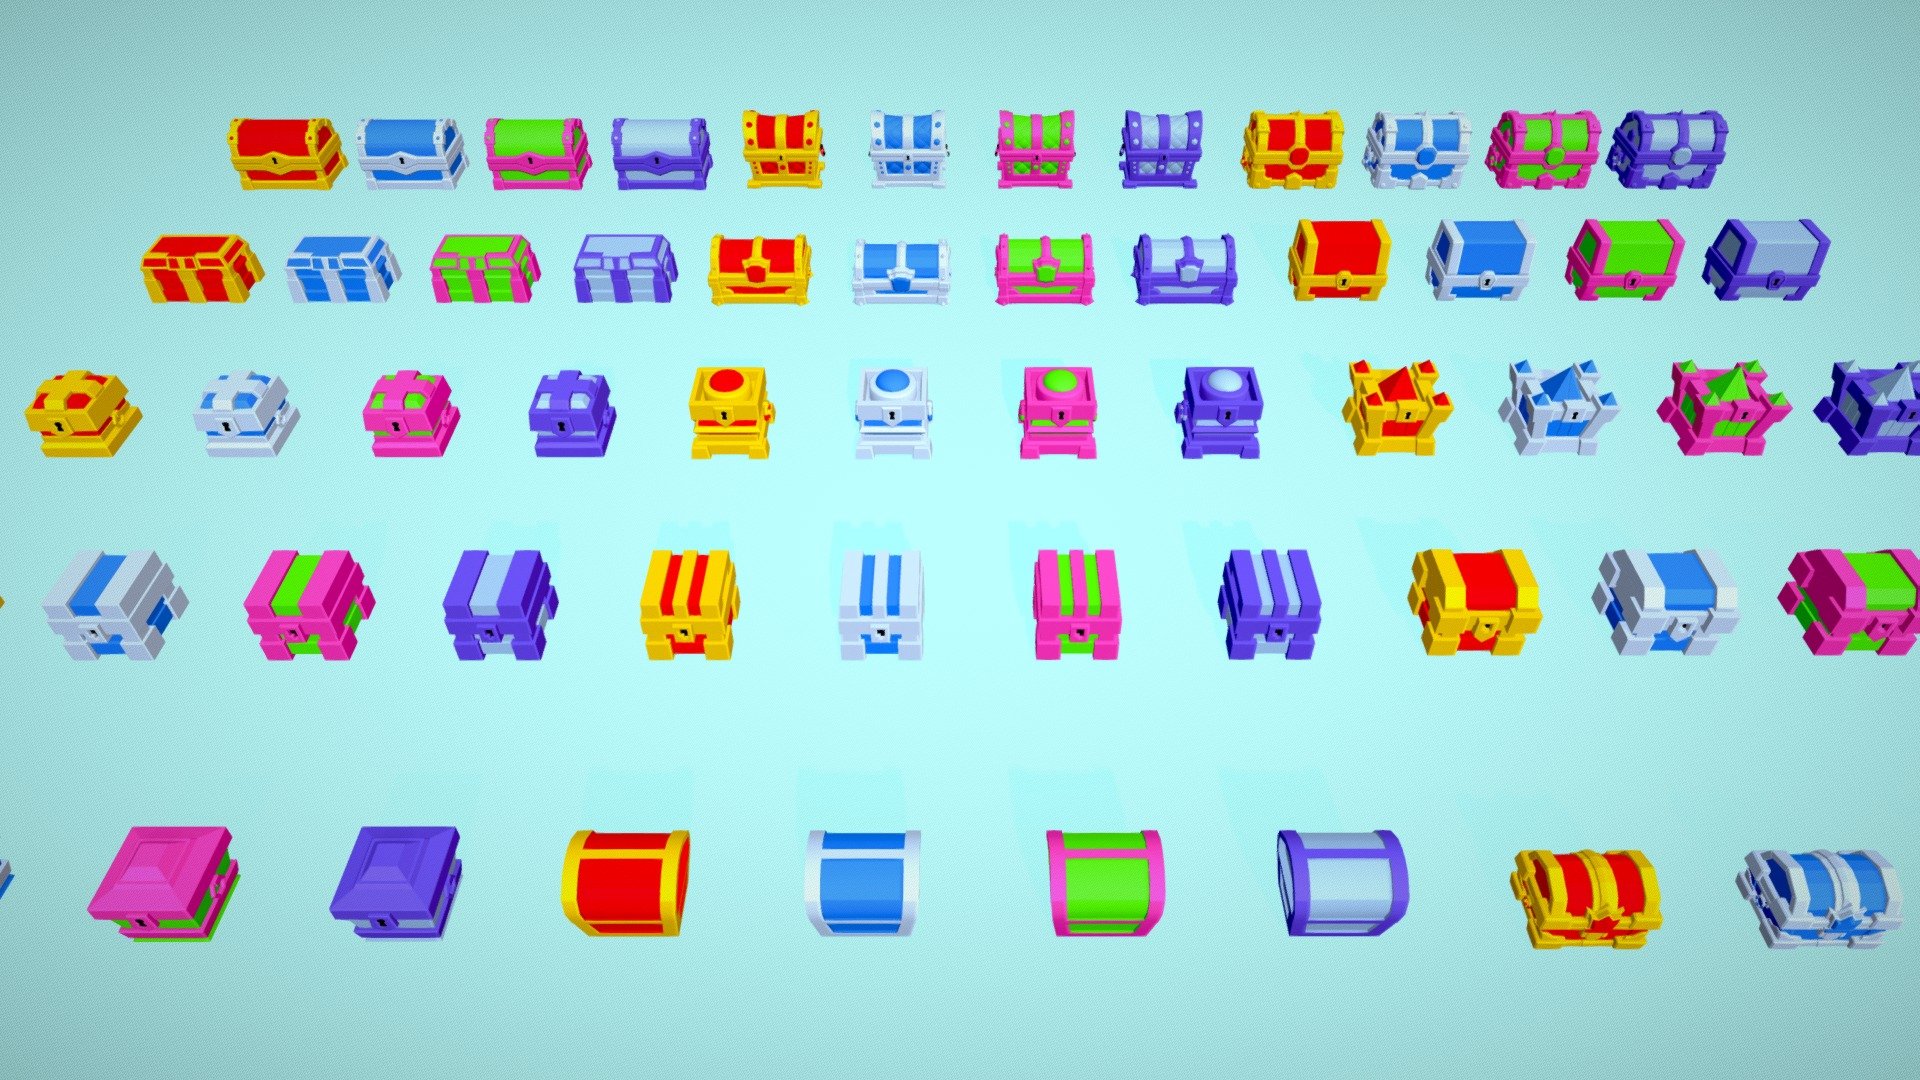 This package contains amazing cartoon-styled 64 low poly treasure chest models in one pack.
This pack is suitable for Reward Systems, Hyper Casual Games (To make an animation of opening treasure on winning), rendering, etc.
This type of treasure pack can be used in almost all types of games.
Each treasure chest is available in 4 color variants.
You can customize various color variants as per your needs by changing the material's color.

All the models are originally modeled in a blender. This pack included the following file formats: Blend.
Buy and enjoy a low poly treasure chest pack and leave valuable comments below. 
Rate this product if you liked it. Thank you 3d model